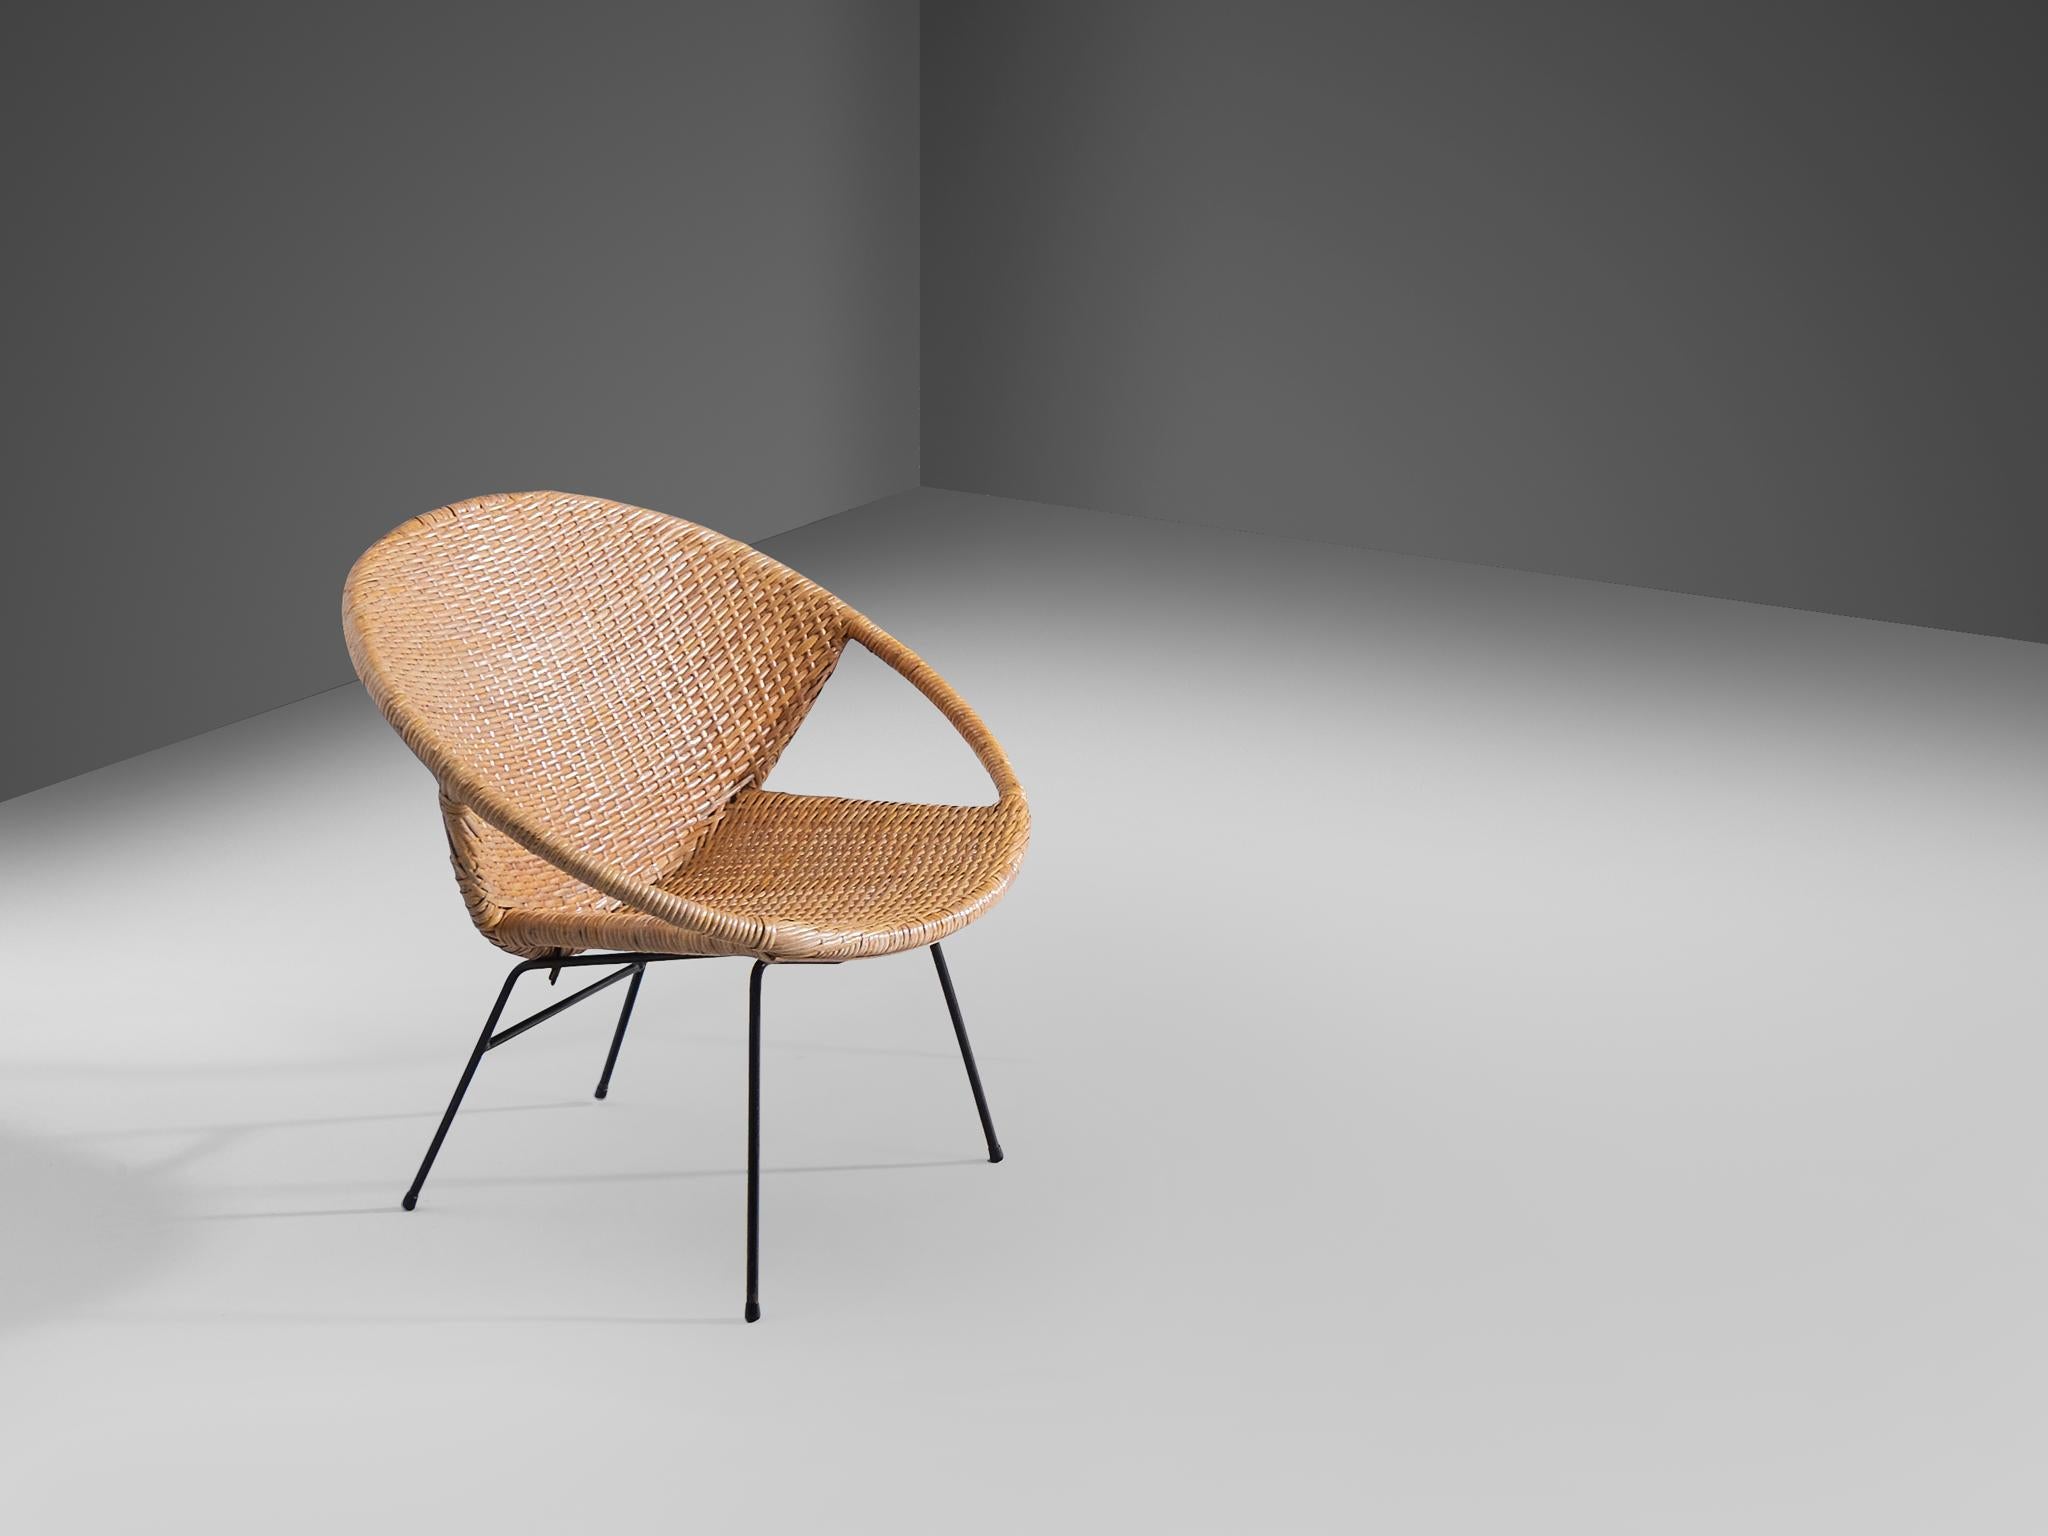 Side chair, rotan, lacquered metal, Scandinavia, 1960s

A circular frame positioned at a diagonal angle forms the foundation of this design. The seat and backrest are set around this circular base, while the frame also serves as the armrest. The